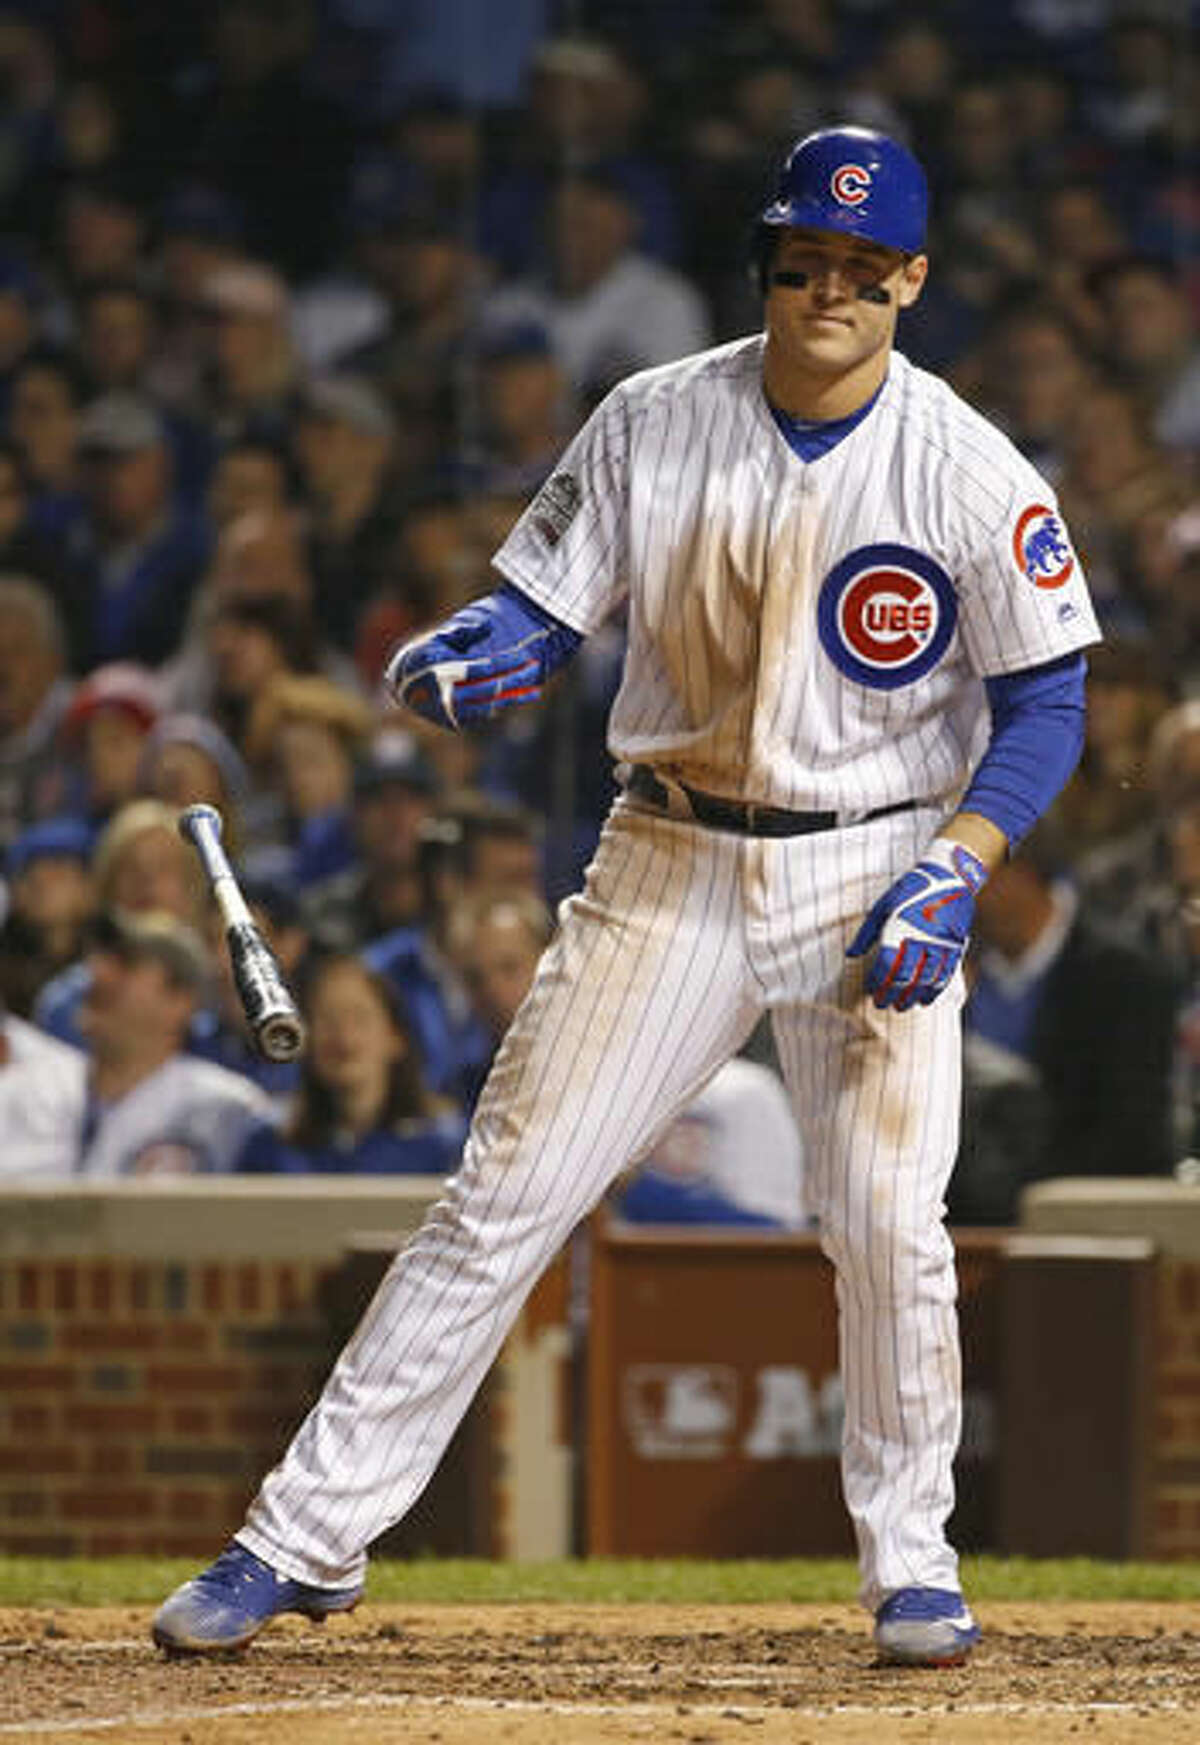 Can You Put a Price On Anthony Rizzo's Cubs 2016 World Series Last Out  Baseball?